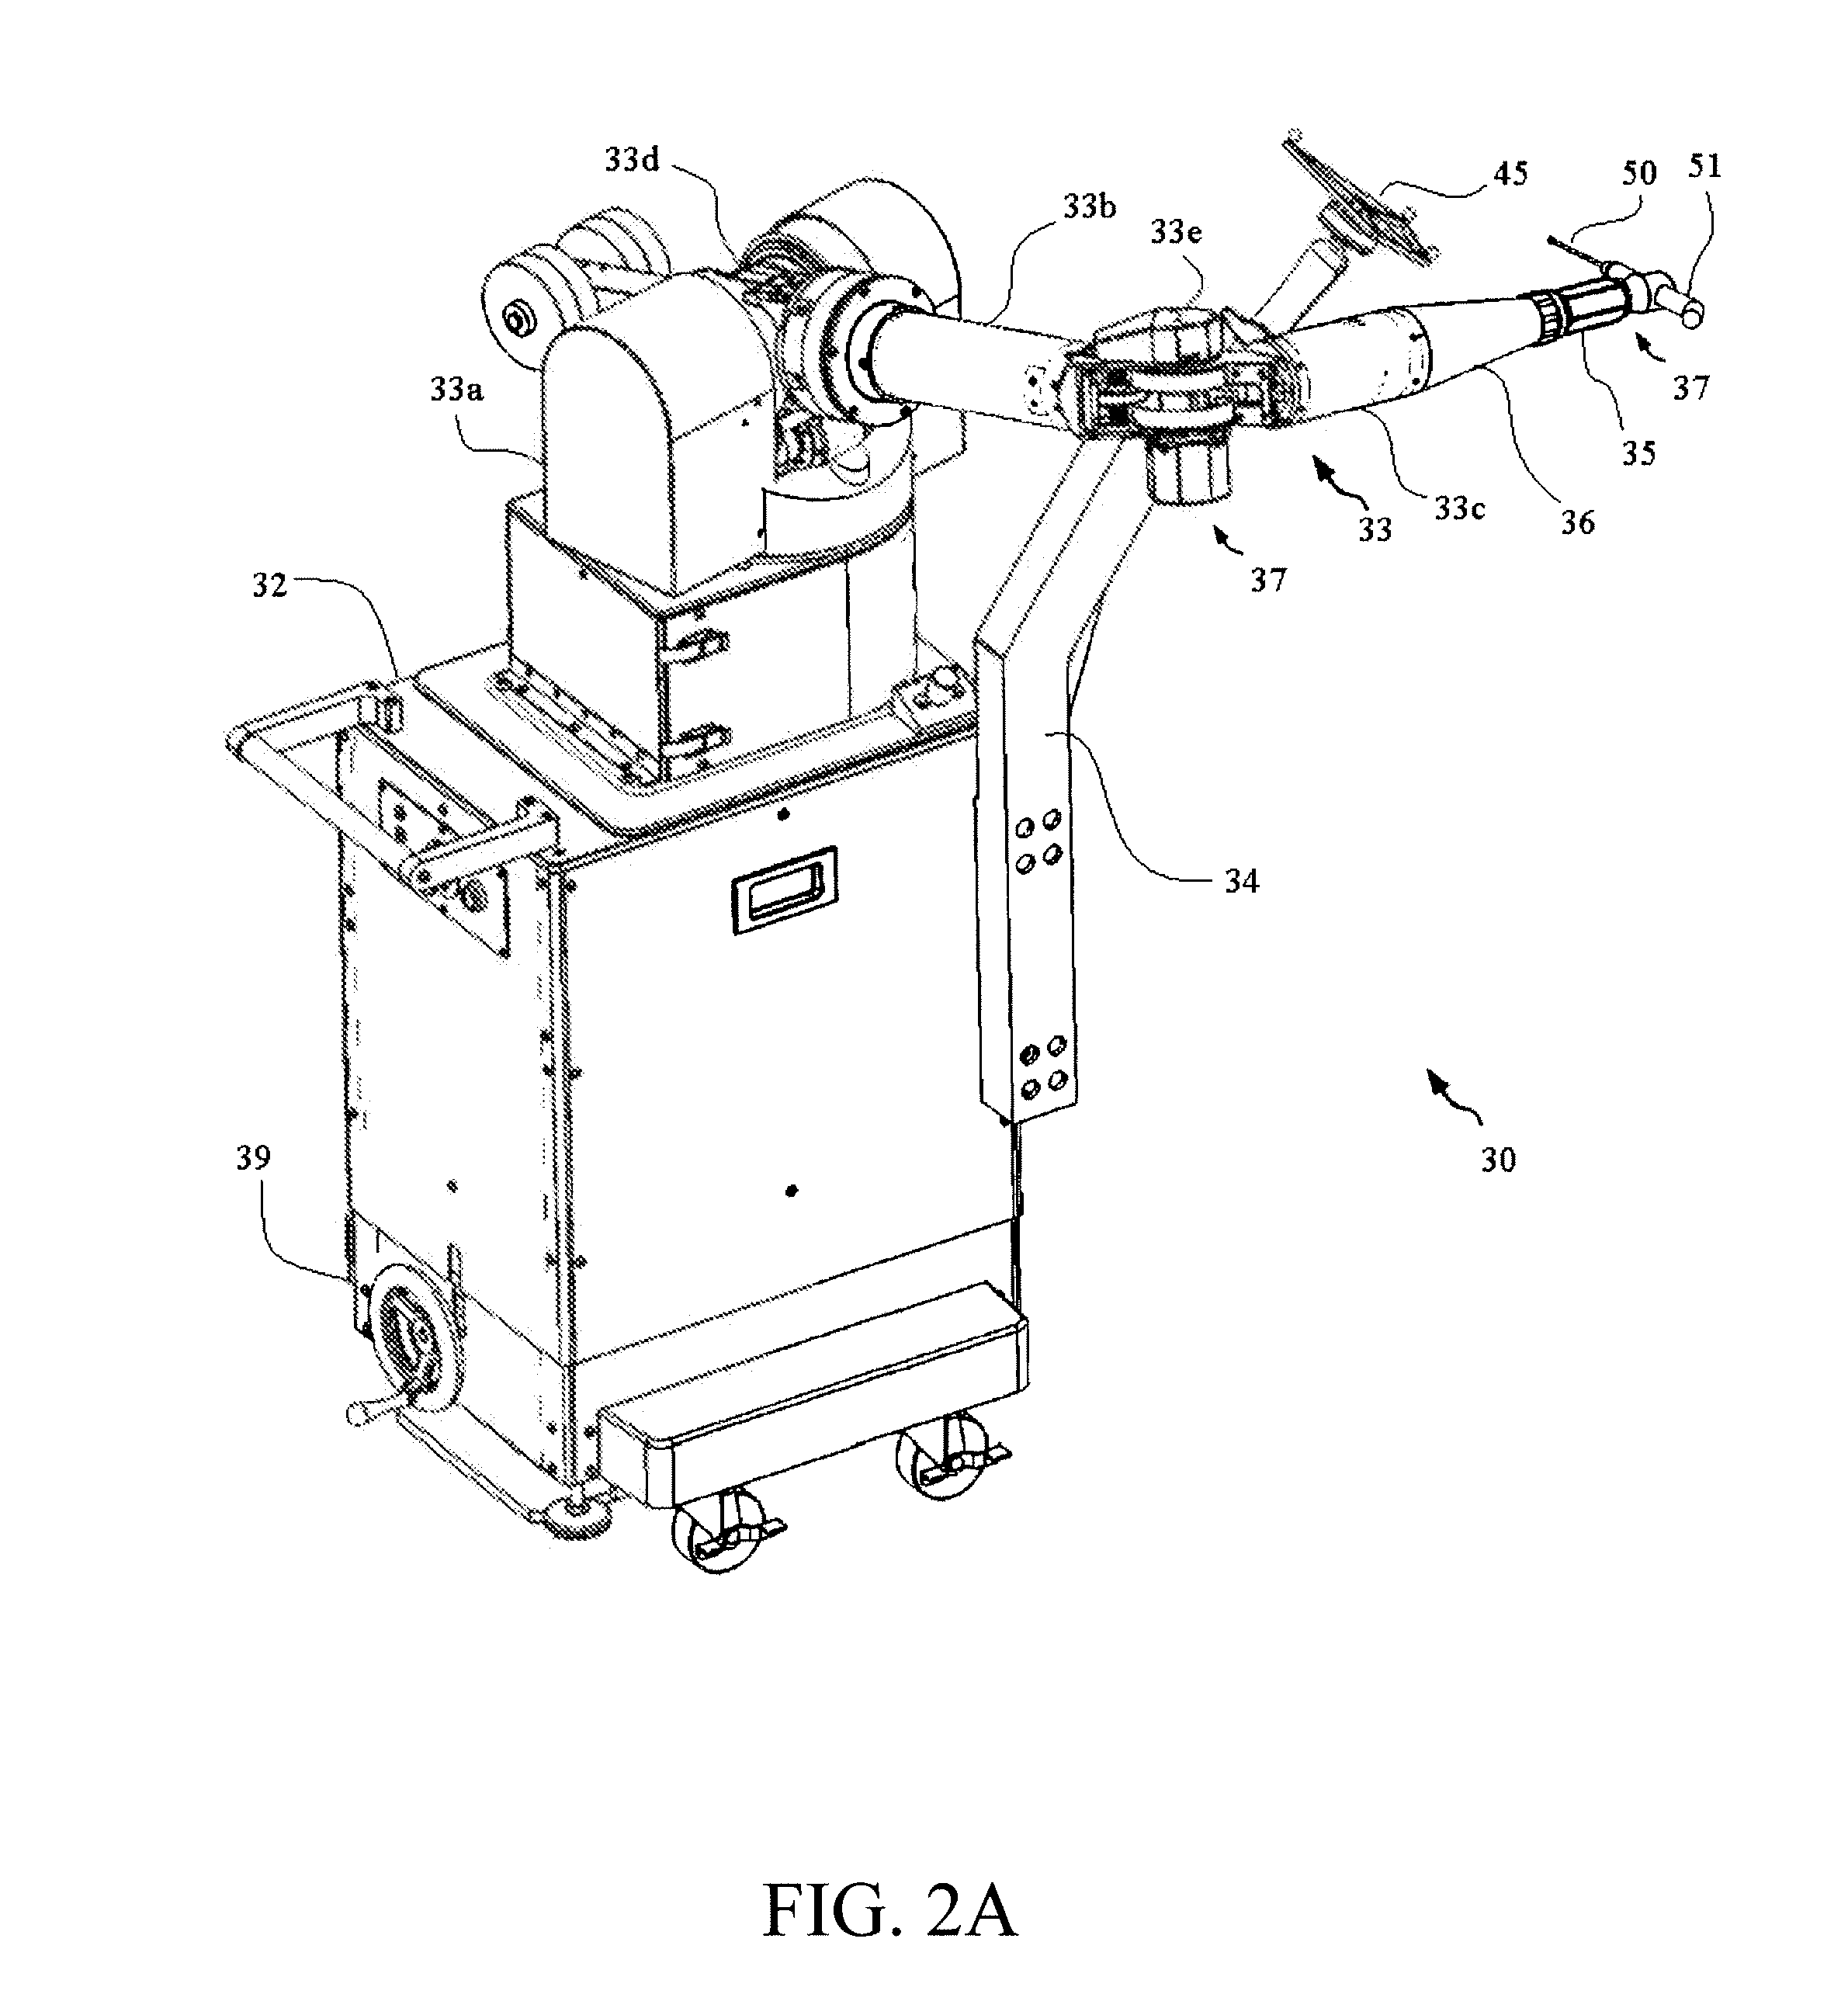 Method and apparatus for controlling a haptic device